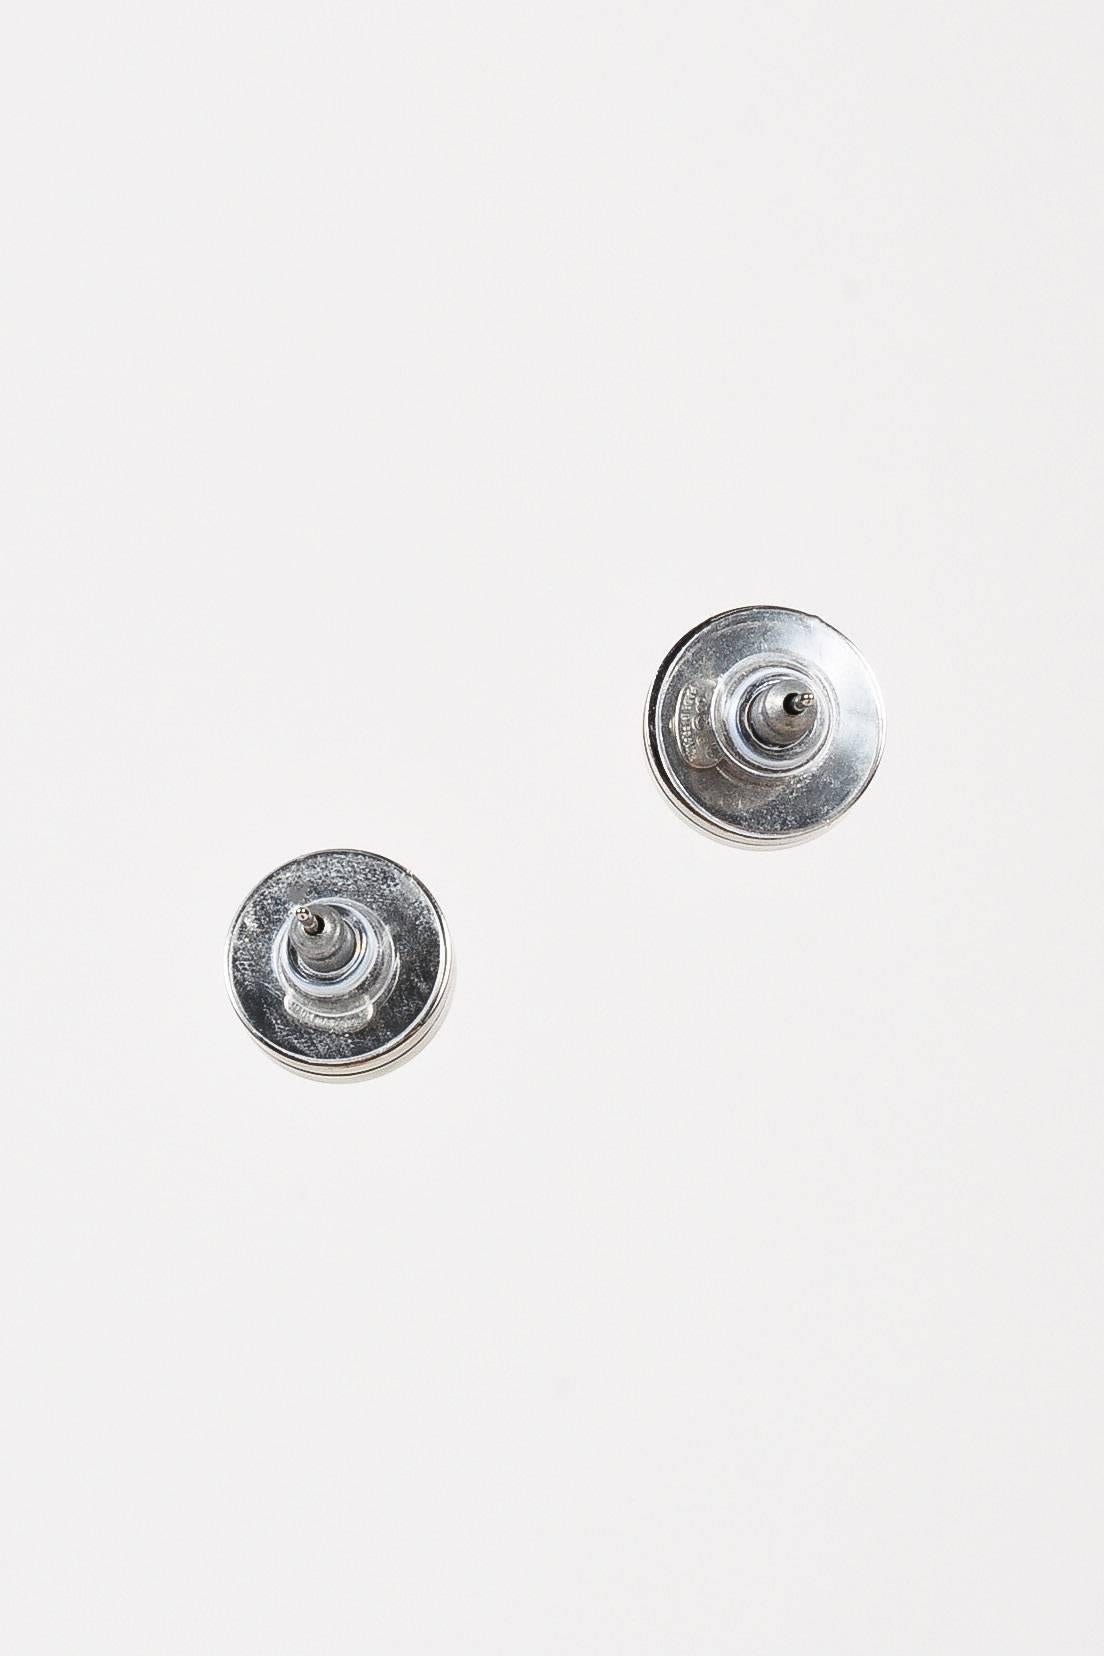 Simple and chic button earrings by Chanel from the 2003 Cruise Collection. Silver-tone metal settings featuring clear lucite over a reflective mirror topped off with white 'CC' logo embellishments. Post backs.

Measurements:
Additional